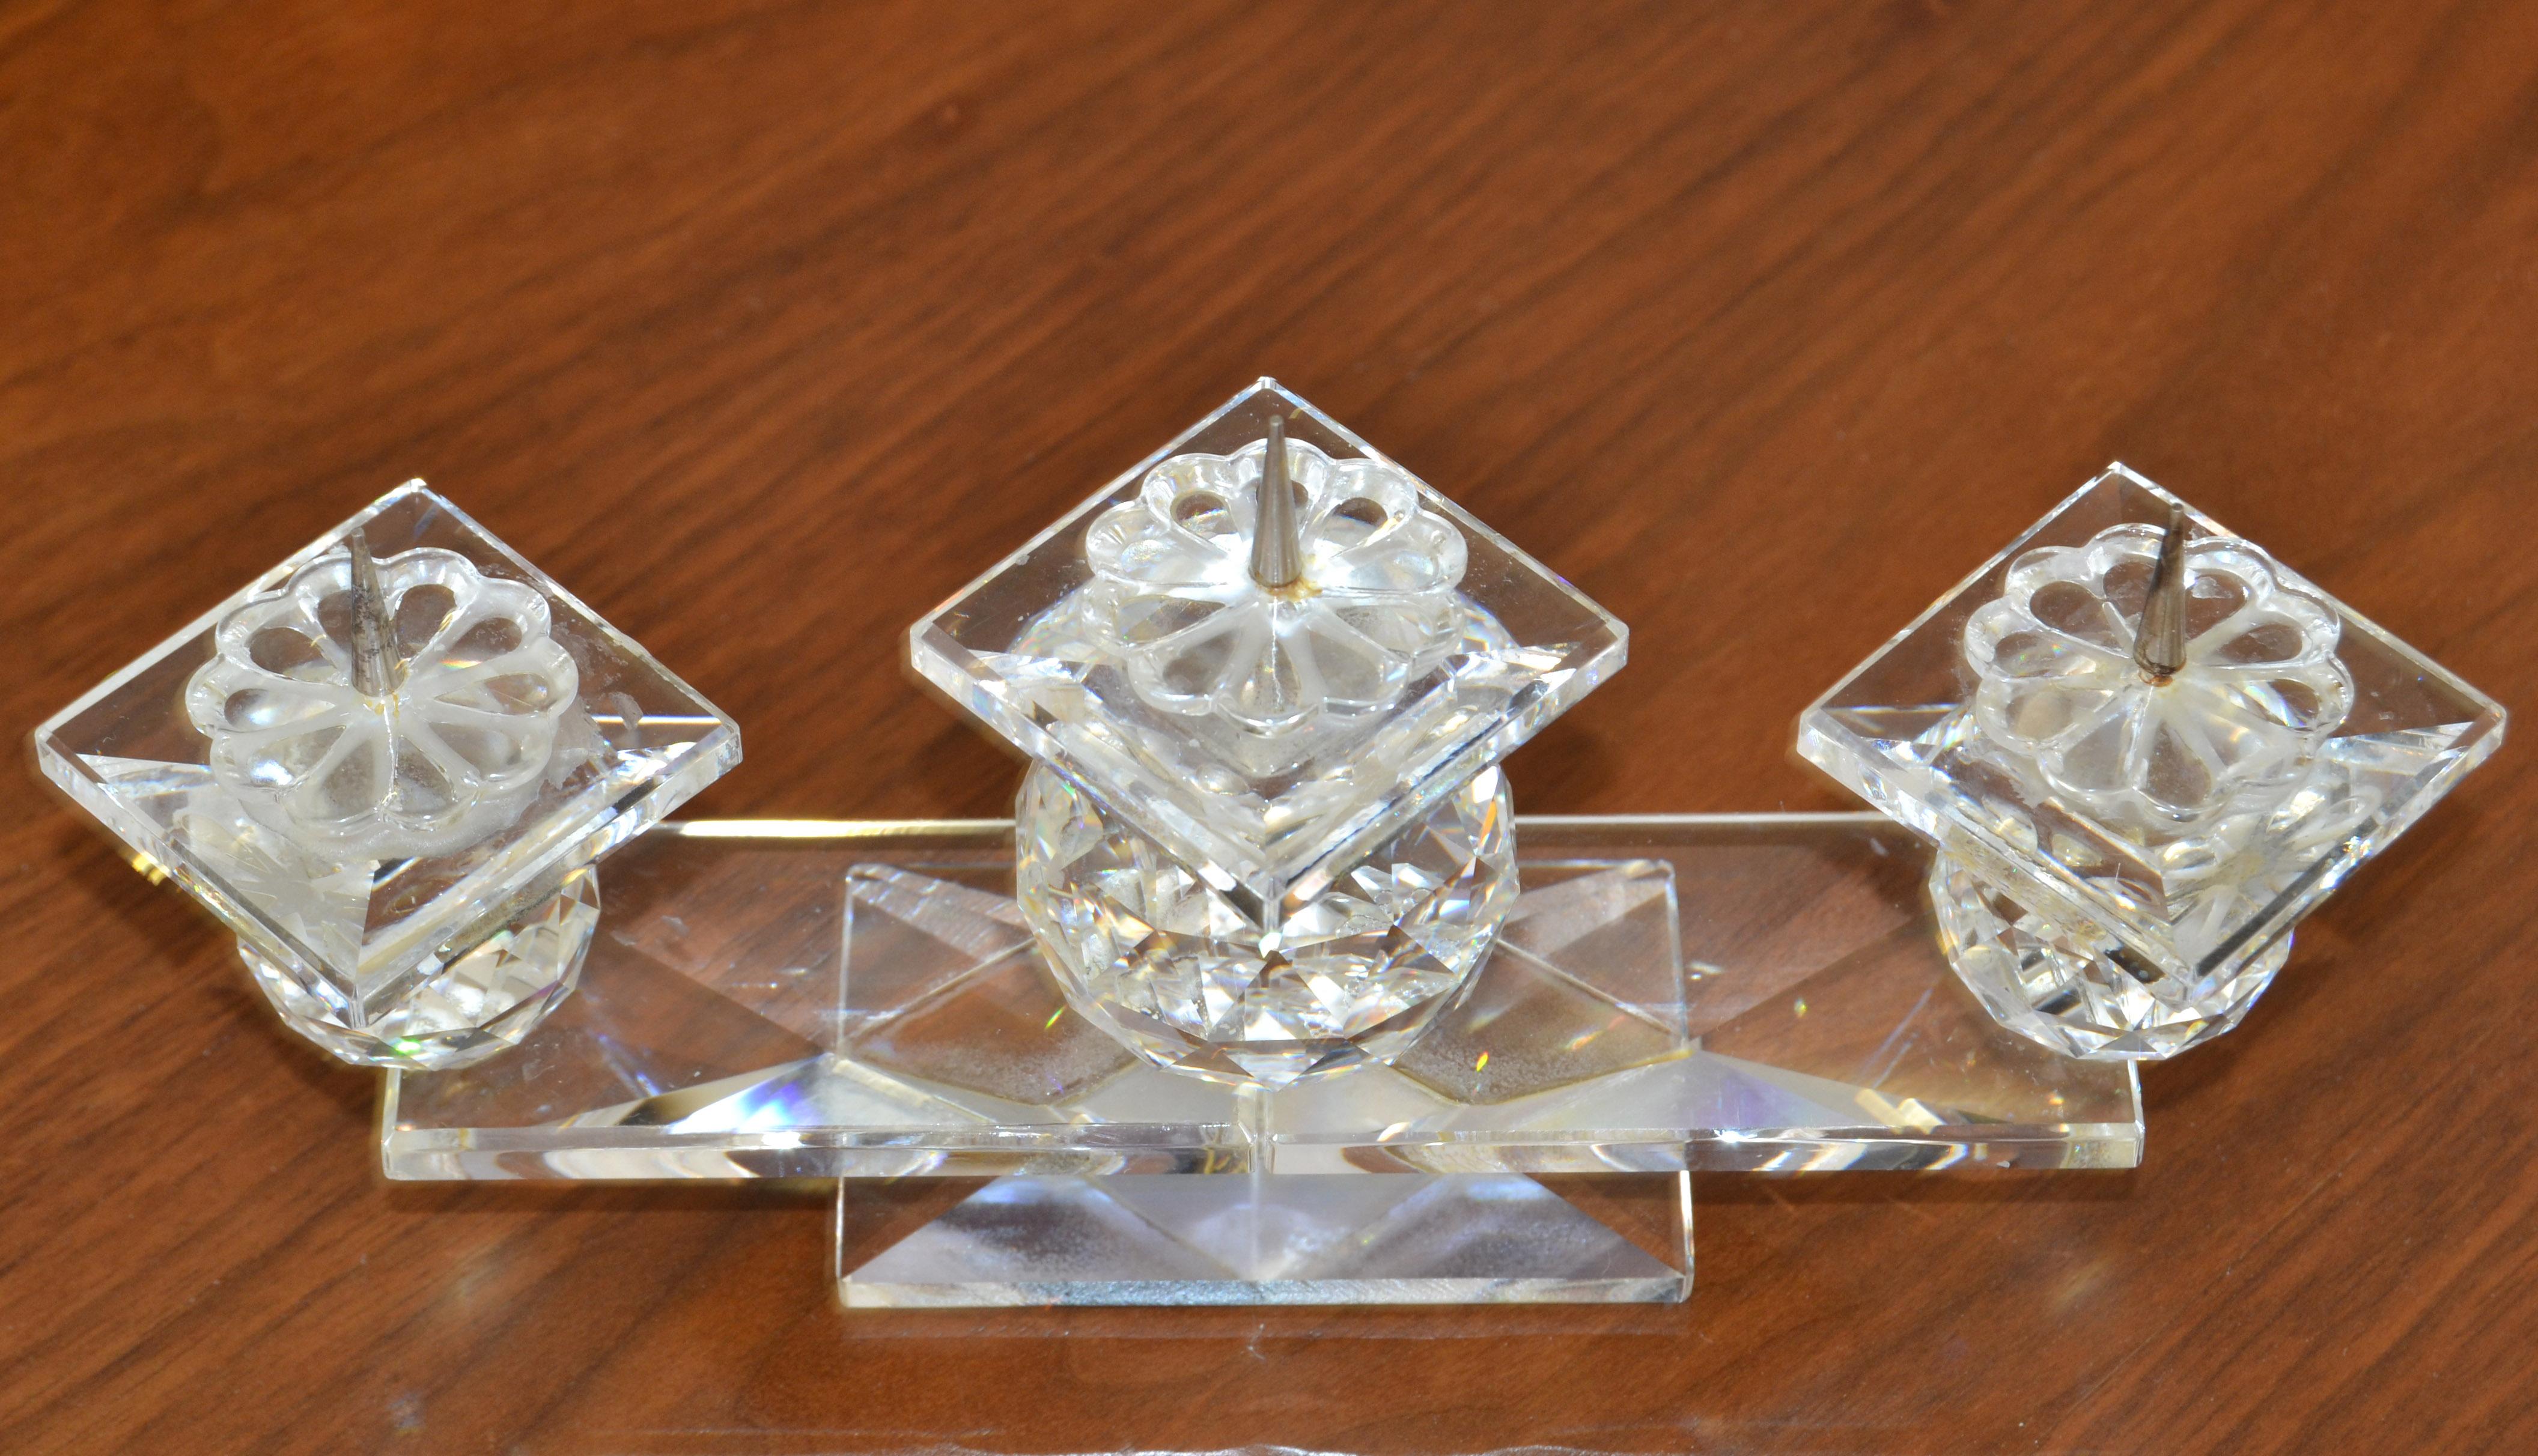 Vintage Swarovski Crystal Triple Pin Candlesticks in the Art Deco Style made in Austria in the 1970.
Features faceted Crystal Balls with Flower Saucers on a rectangular Glass Base.
Signed on the Base, Swarovski.
In good vintage condition with